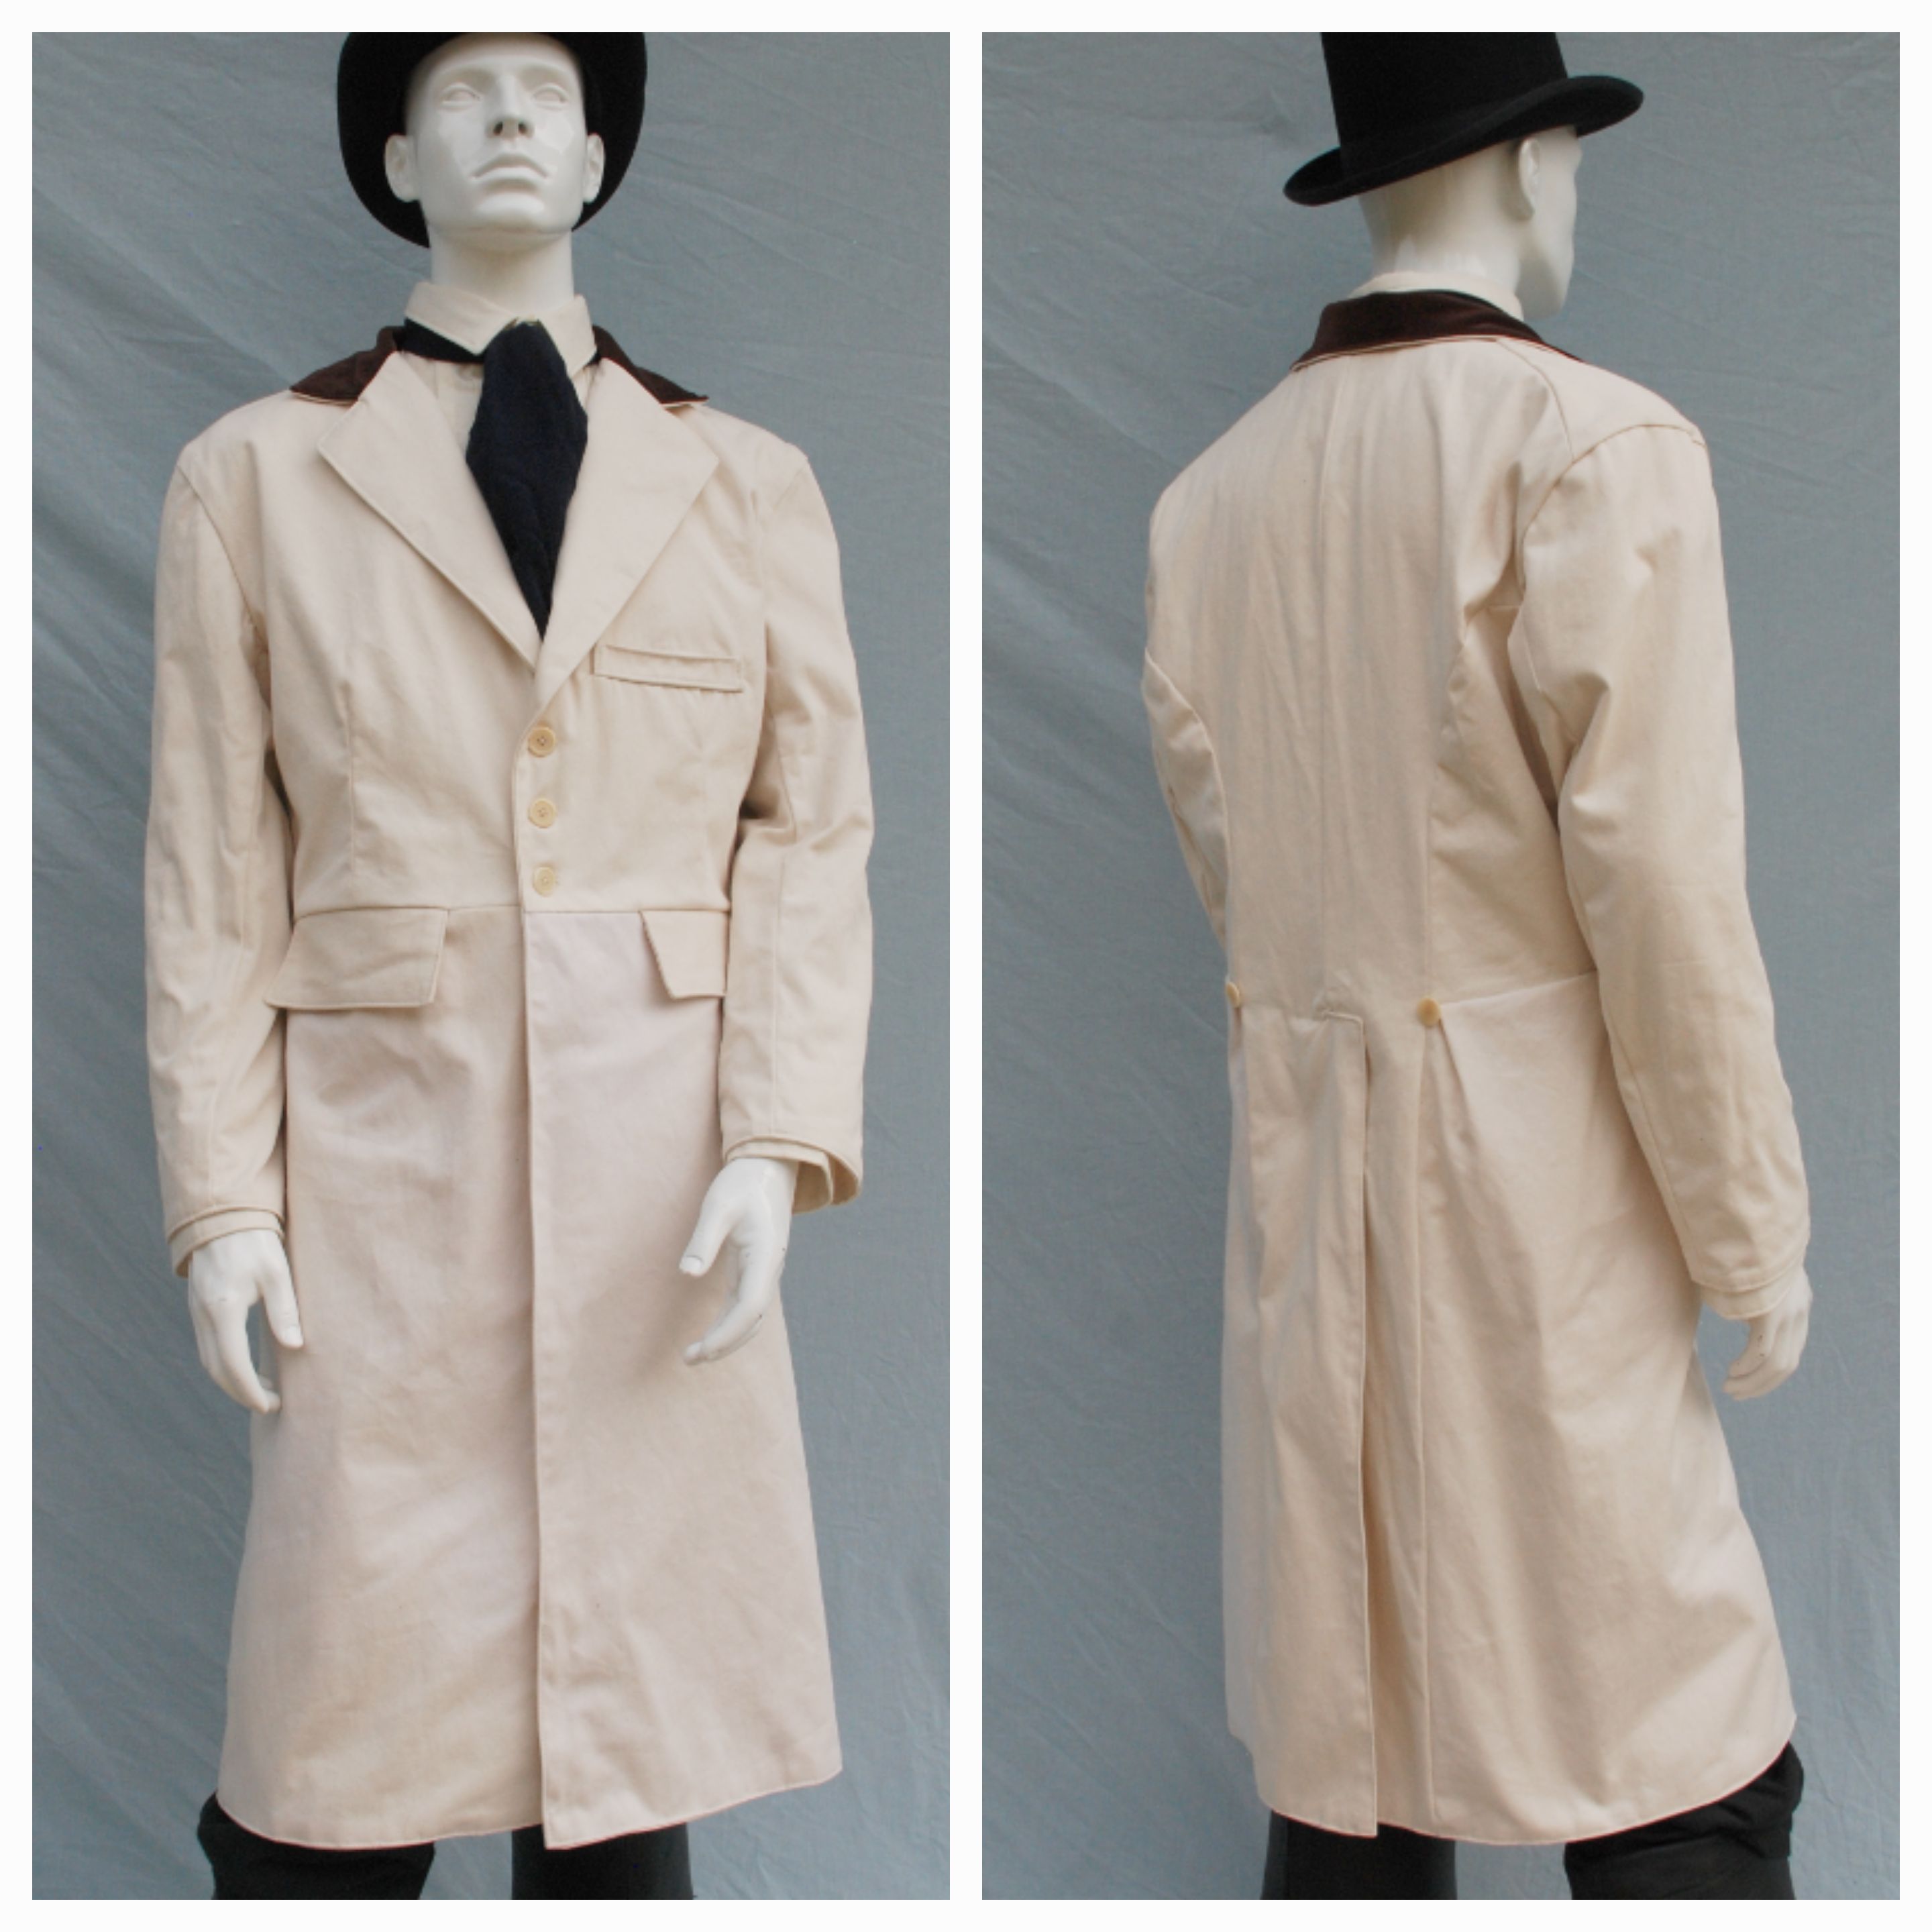 Cotton Twill Frock Coat in Ivory